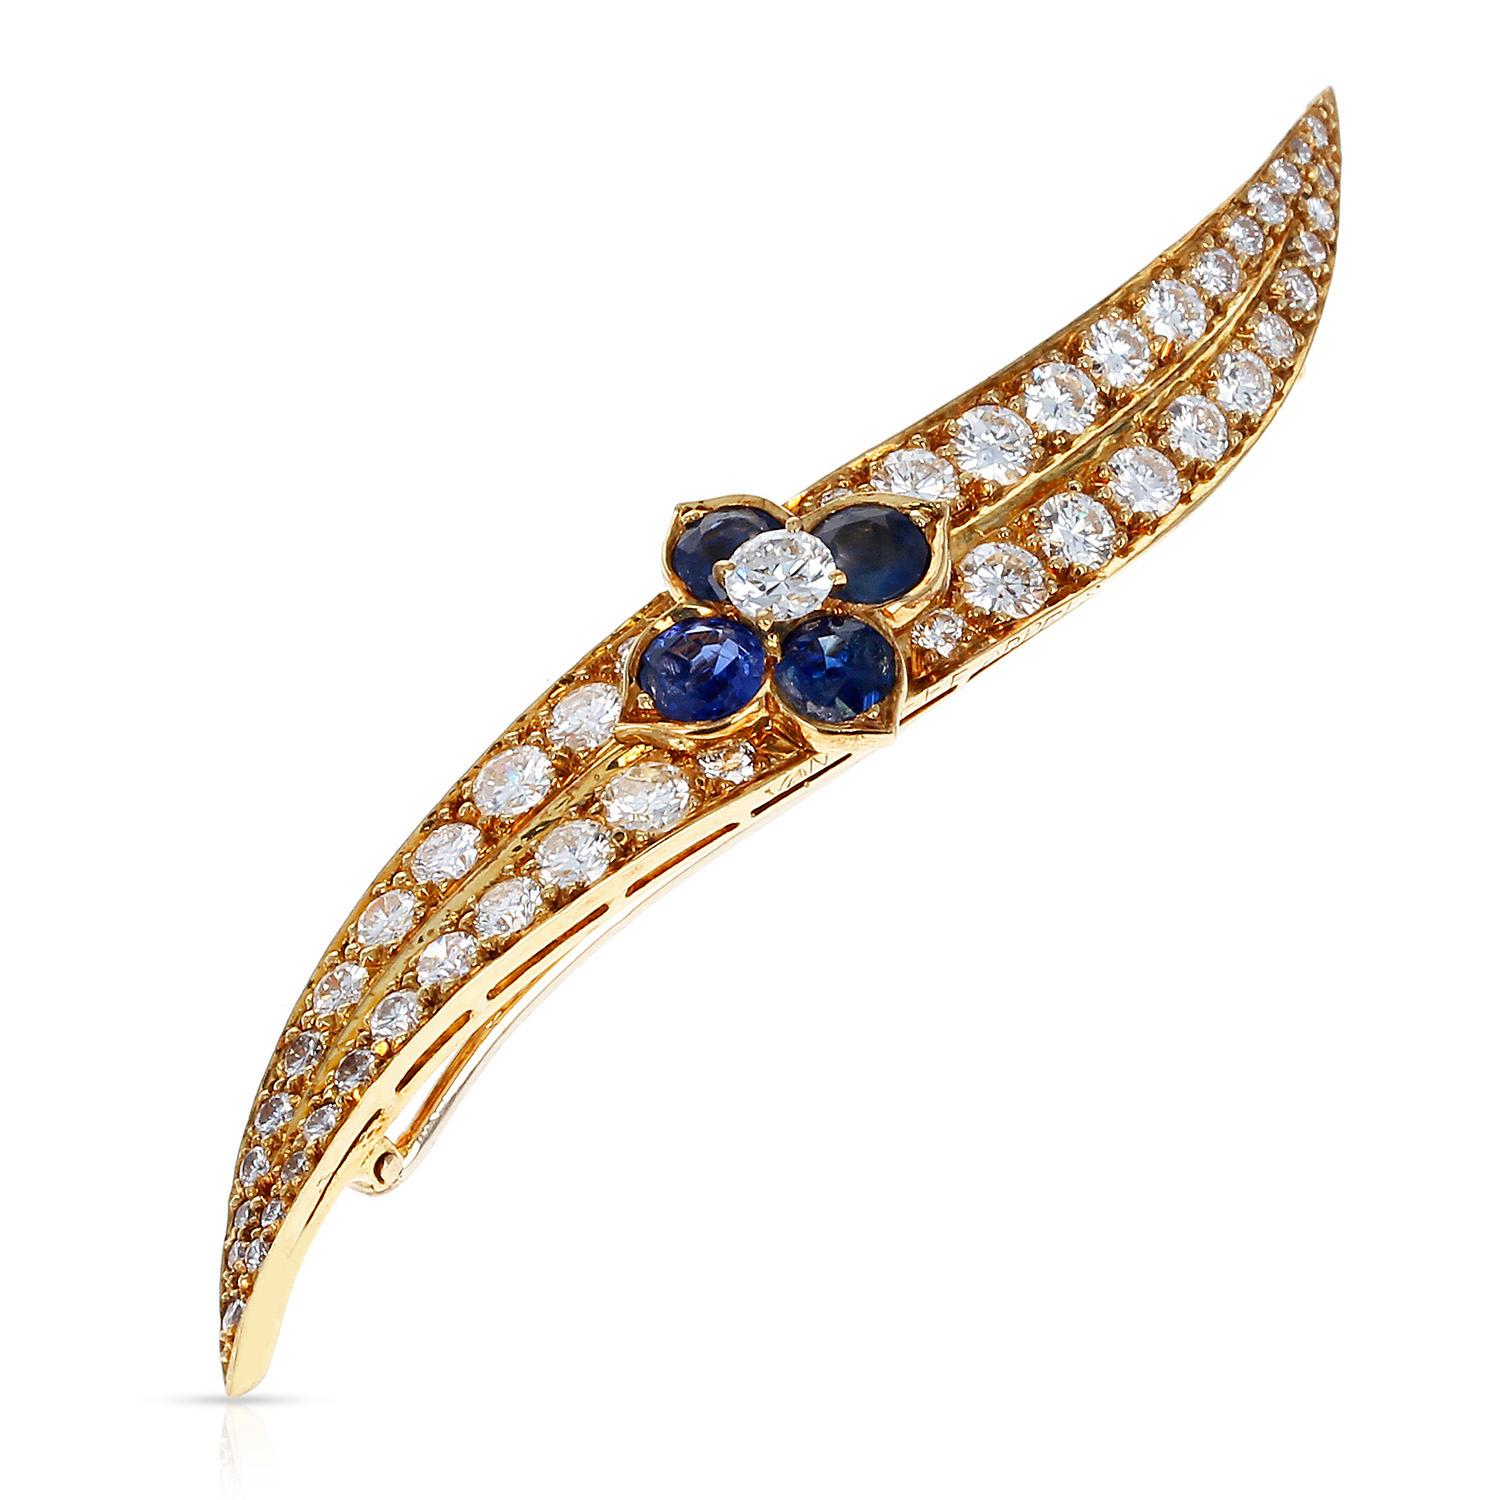 Van Cleef & Arpels Sapphire Floral and Diamond Pin made in 18 Karat Yellow Gold. Total Weight: 8.18 grams. Length: 2.50